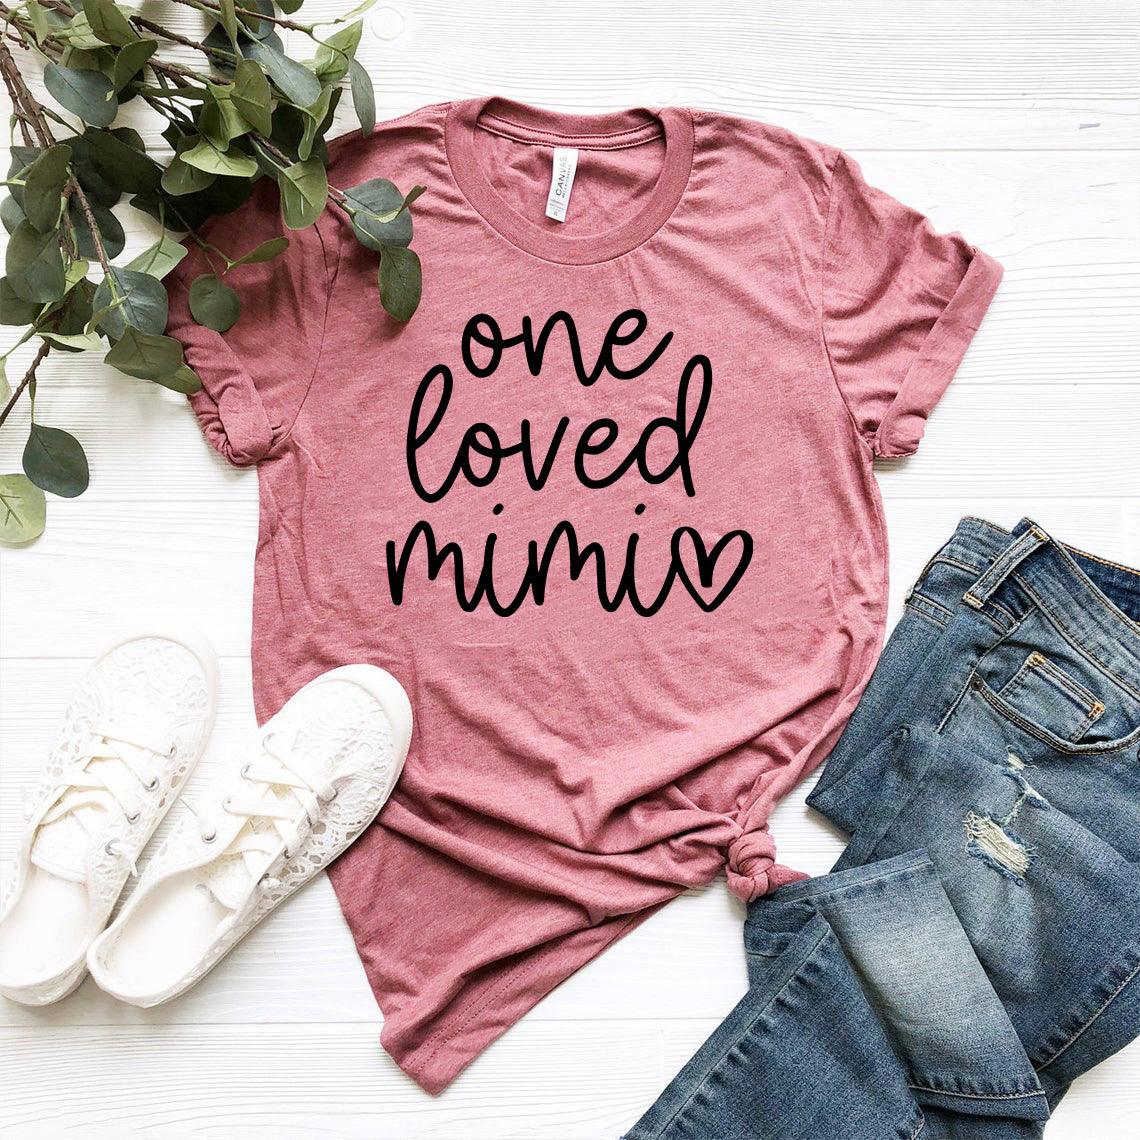 One Loved Mimi Shirt - VirtuousWares:Global